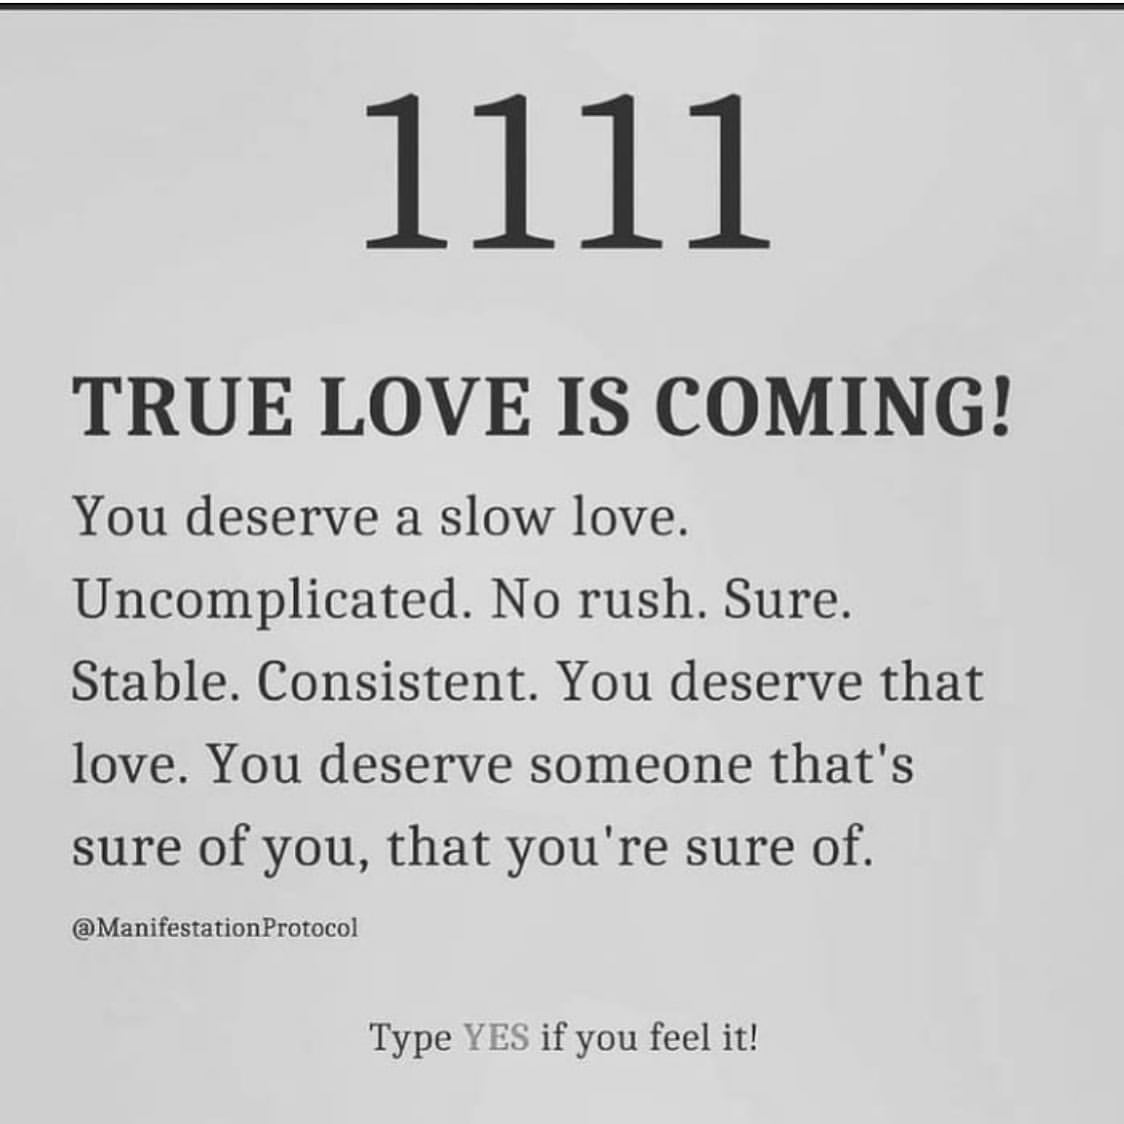 True love is coming! You deserve a slow love. Uncomplicated. No rush. Sure. Stable. Consistent. You deserve that love. You deserve someone that's sure of you, that you're sure of.